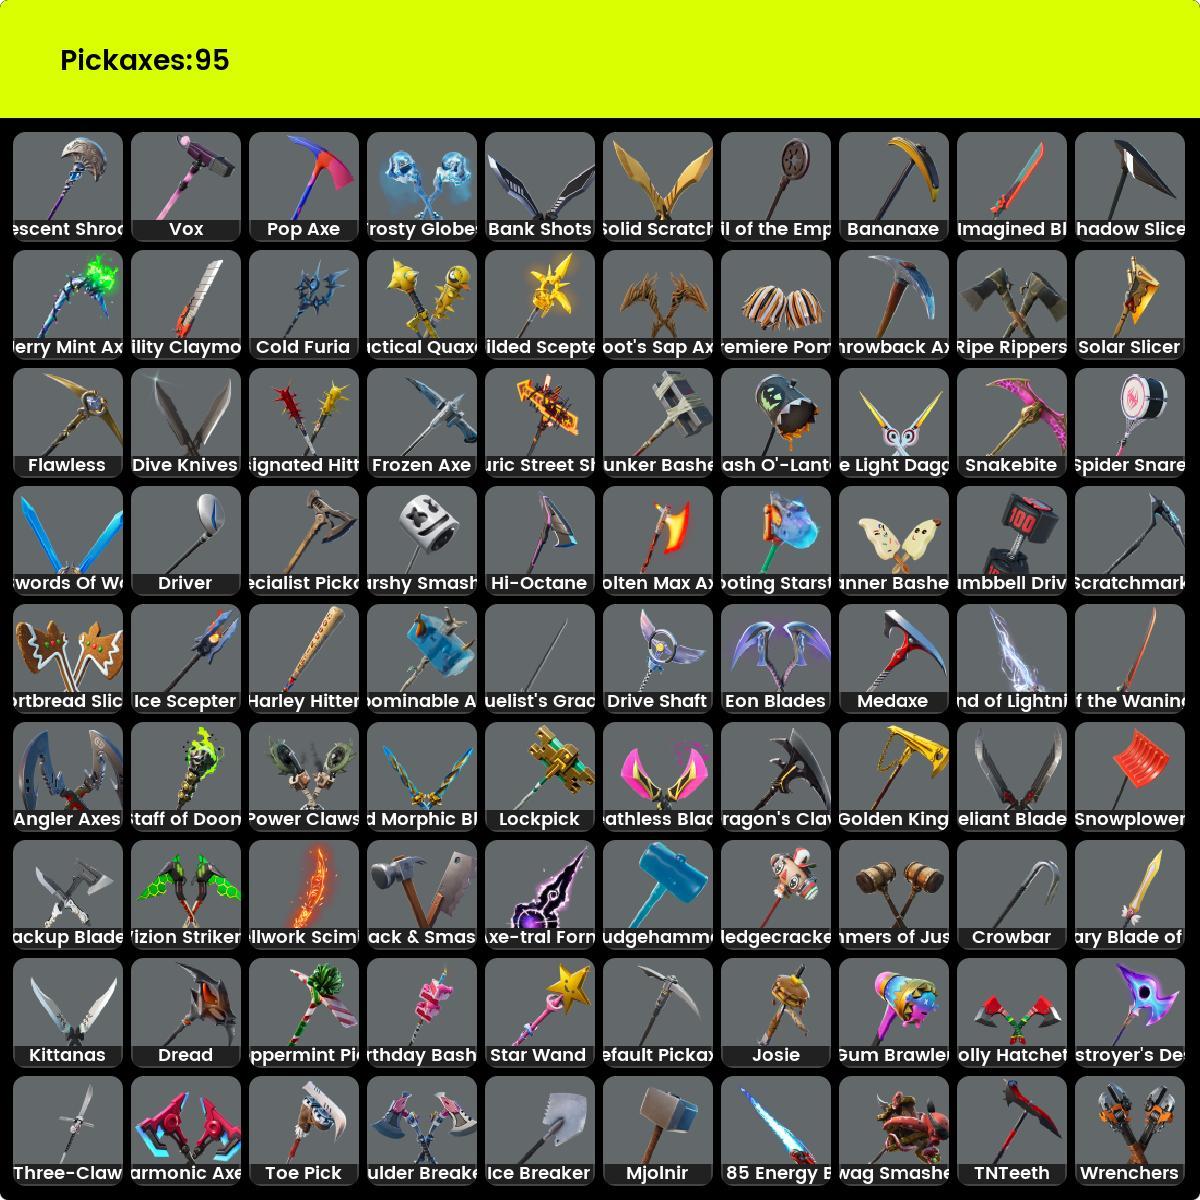 |75 skins : Merry Mint Axe / Gold Midas / Gold Brutus / Prodigy / Eternal Knight / Luxe / Rox / Fusion / Ruin / Sentinel / Hybrid / [PC/XBOX]